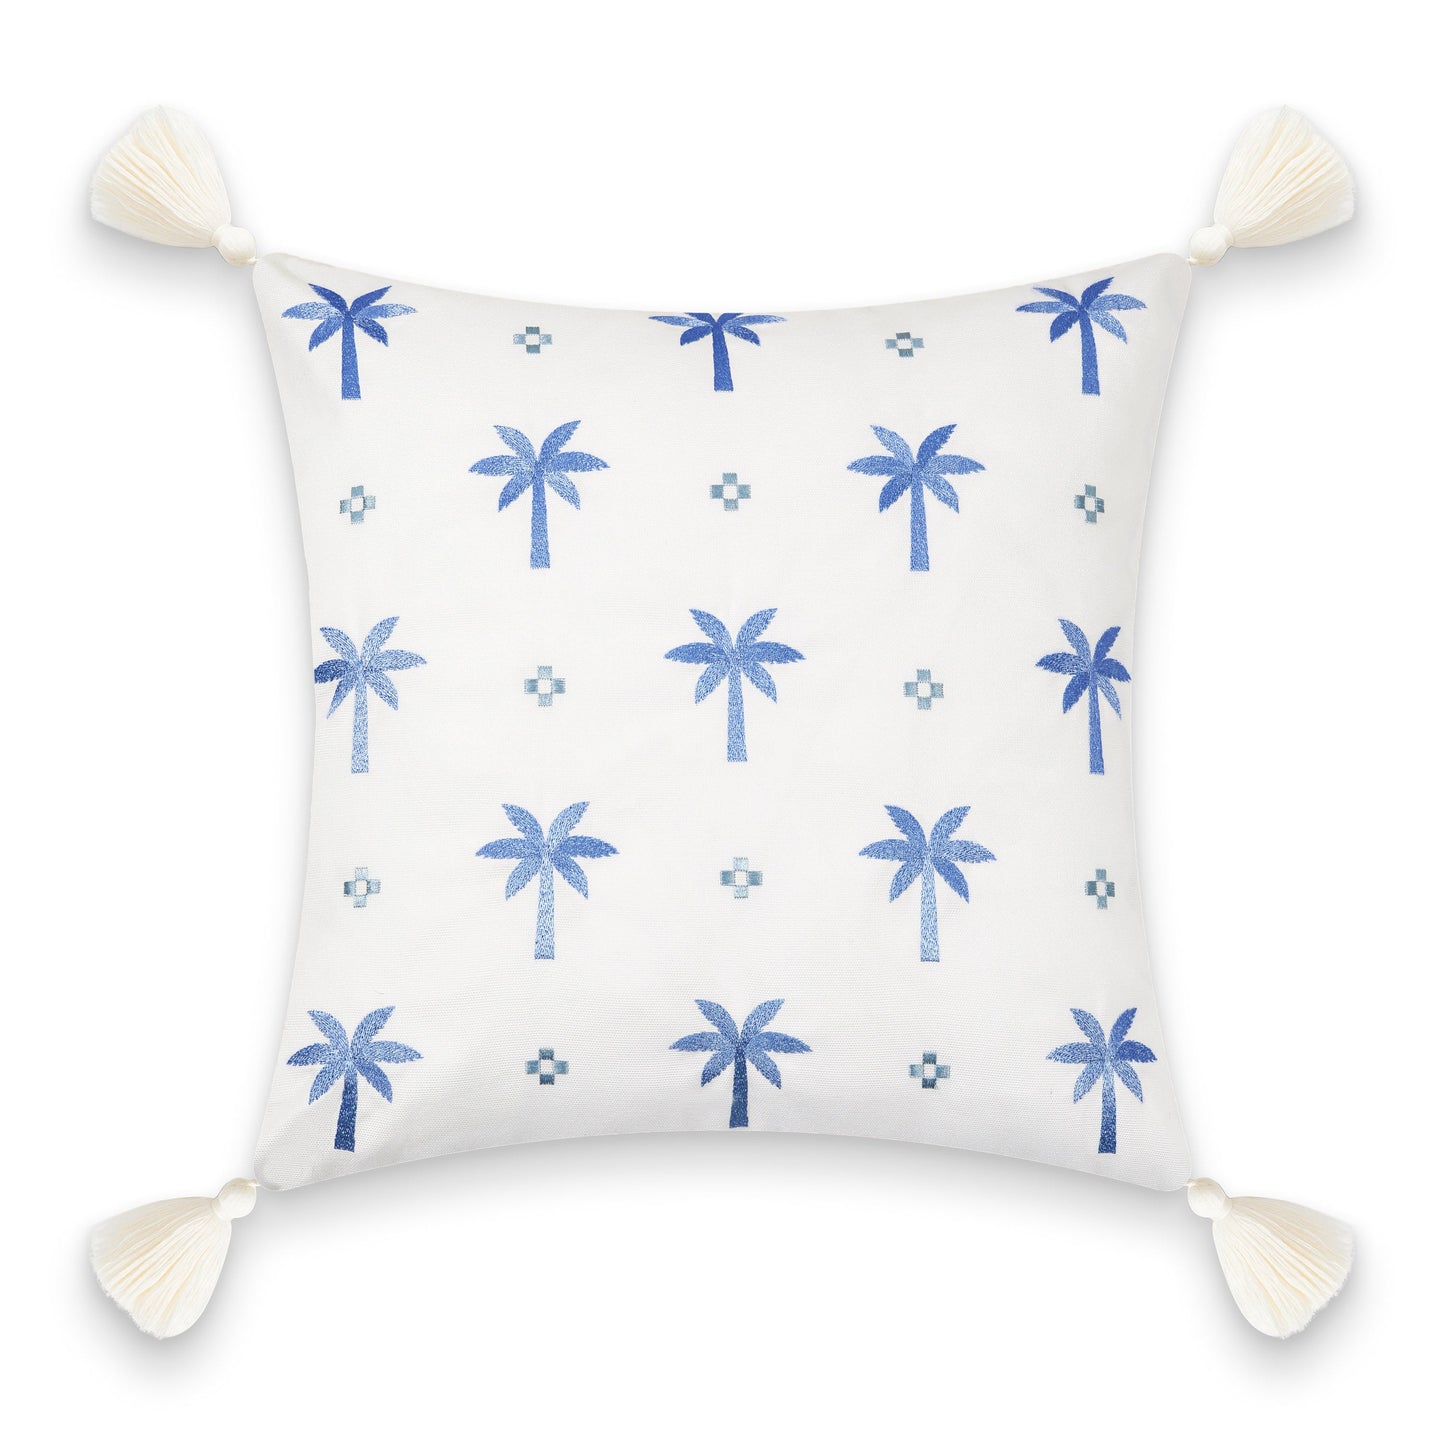 Coastal Indoor Outdoor Pillow Cover, Embroidered Coconut Tree Tassel, Cornflower Blue, 20"x20"-5